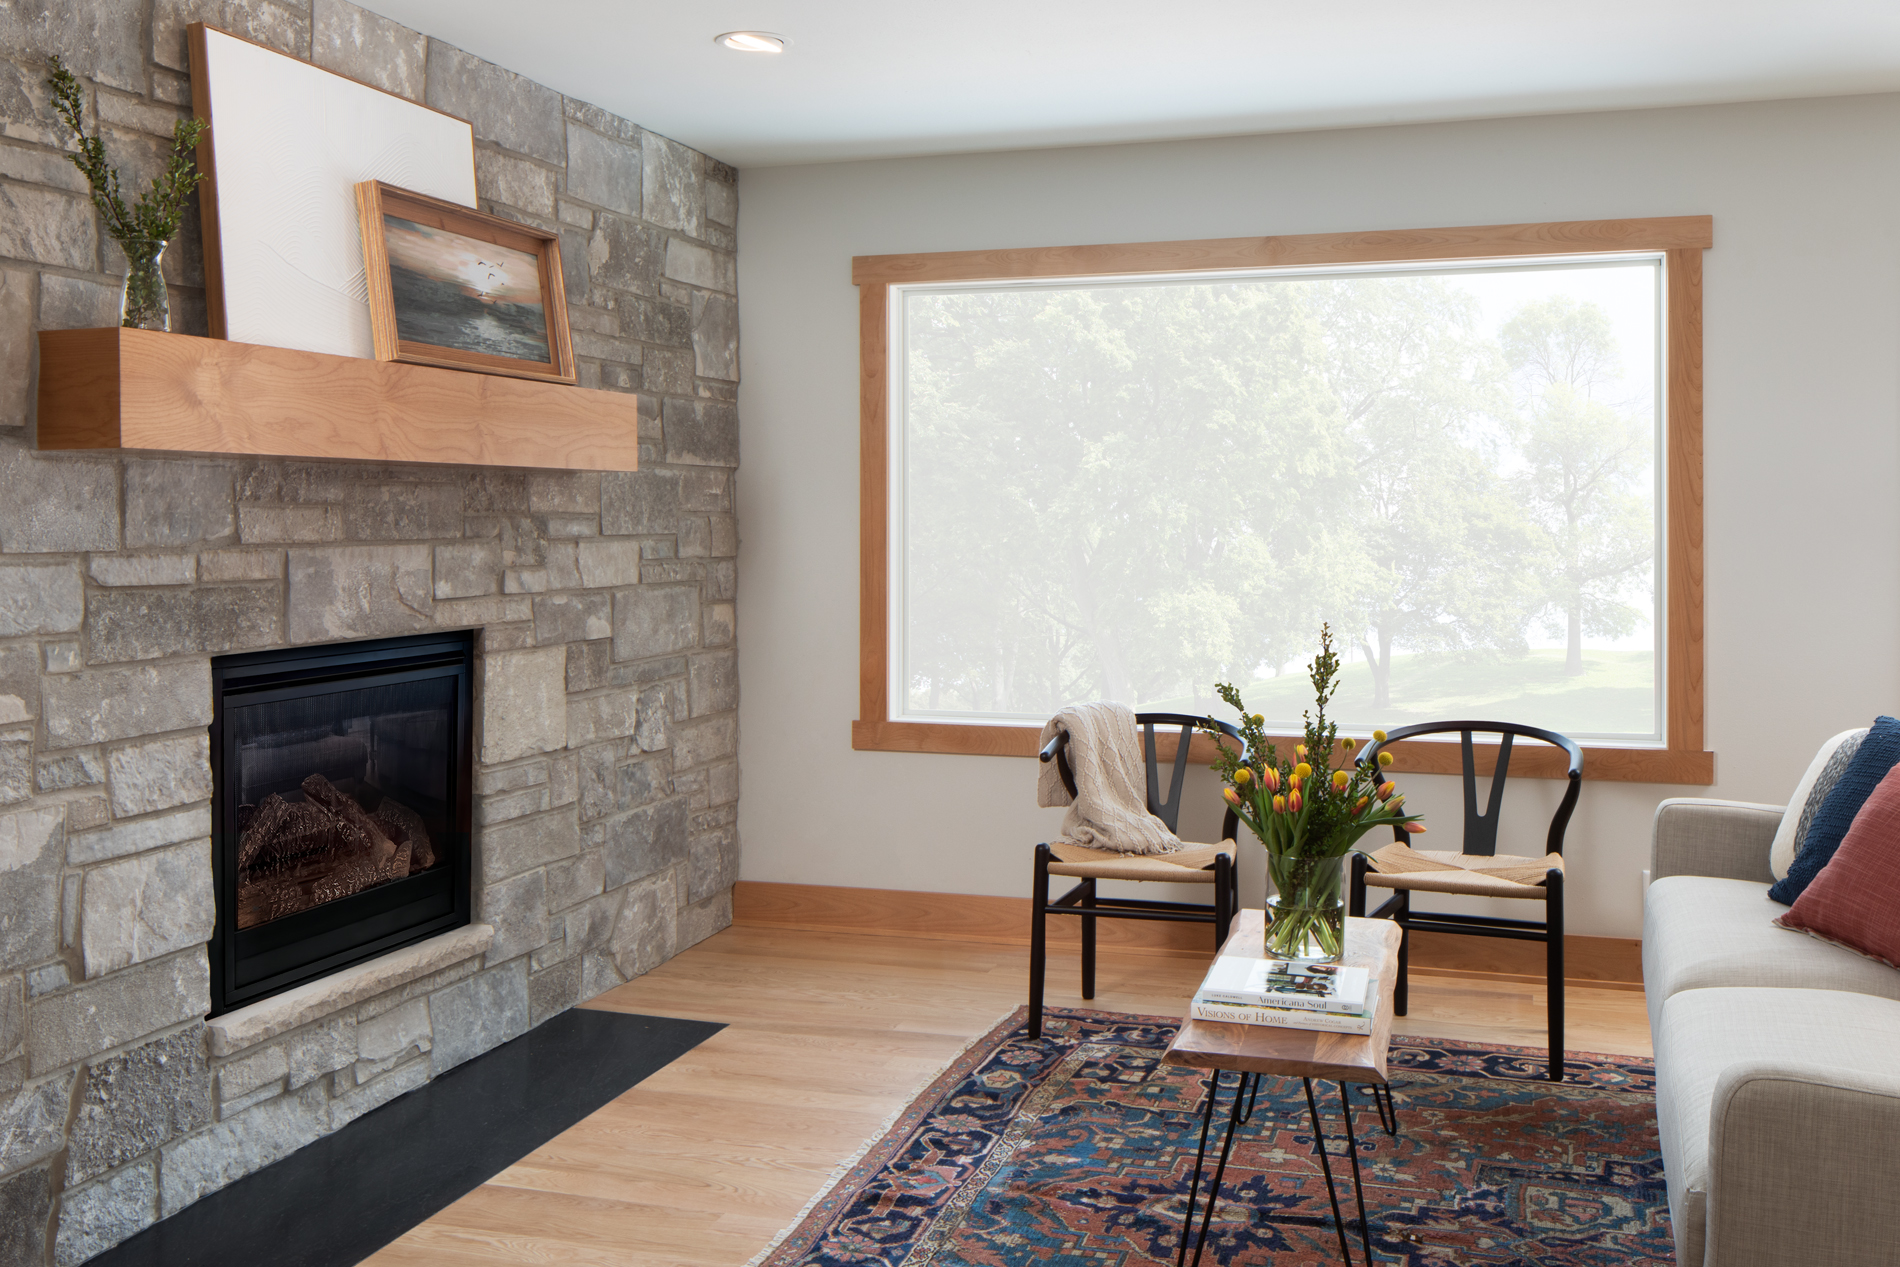 Remodeled living room with stone wall and fireplace